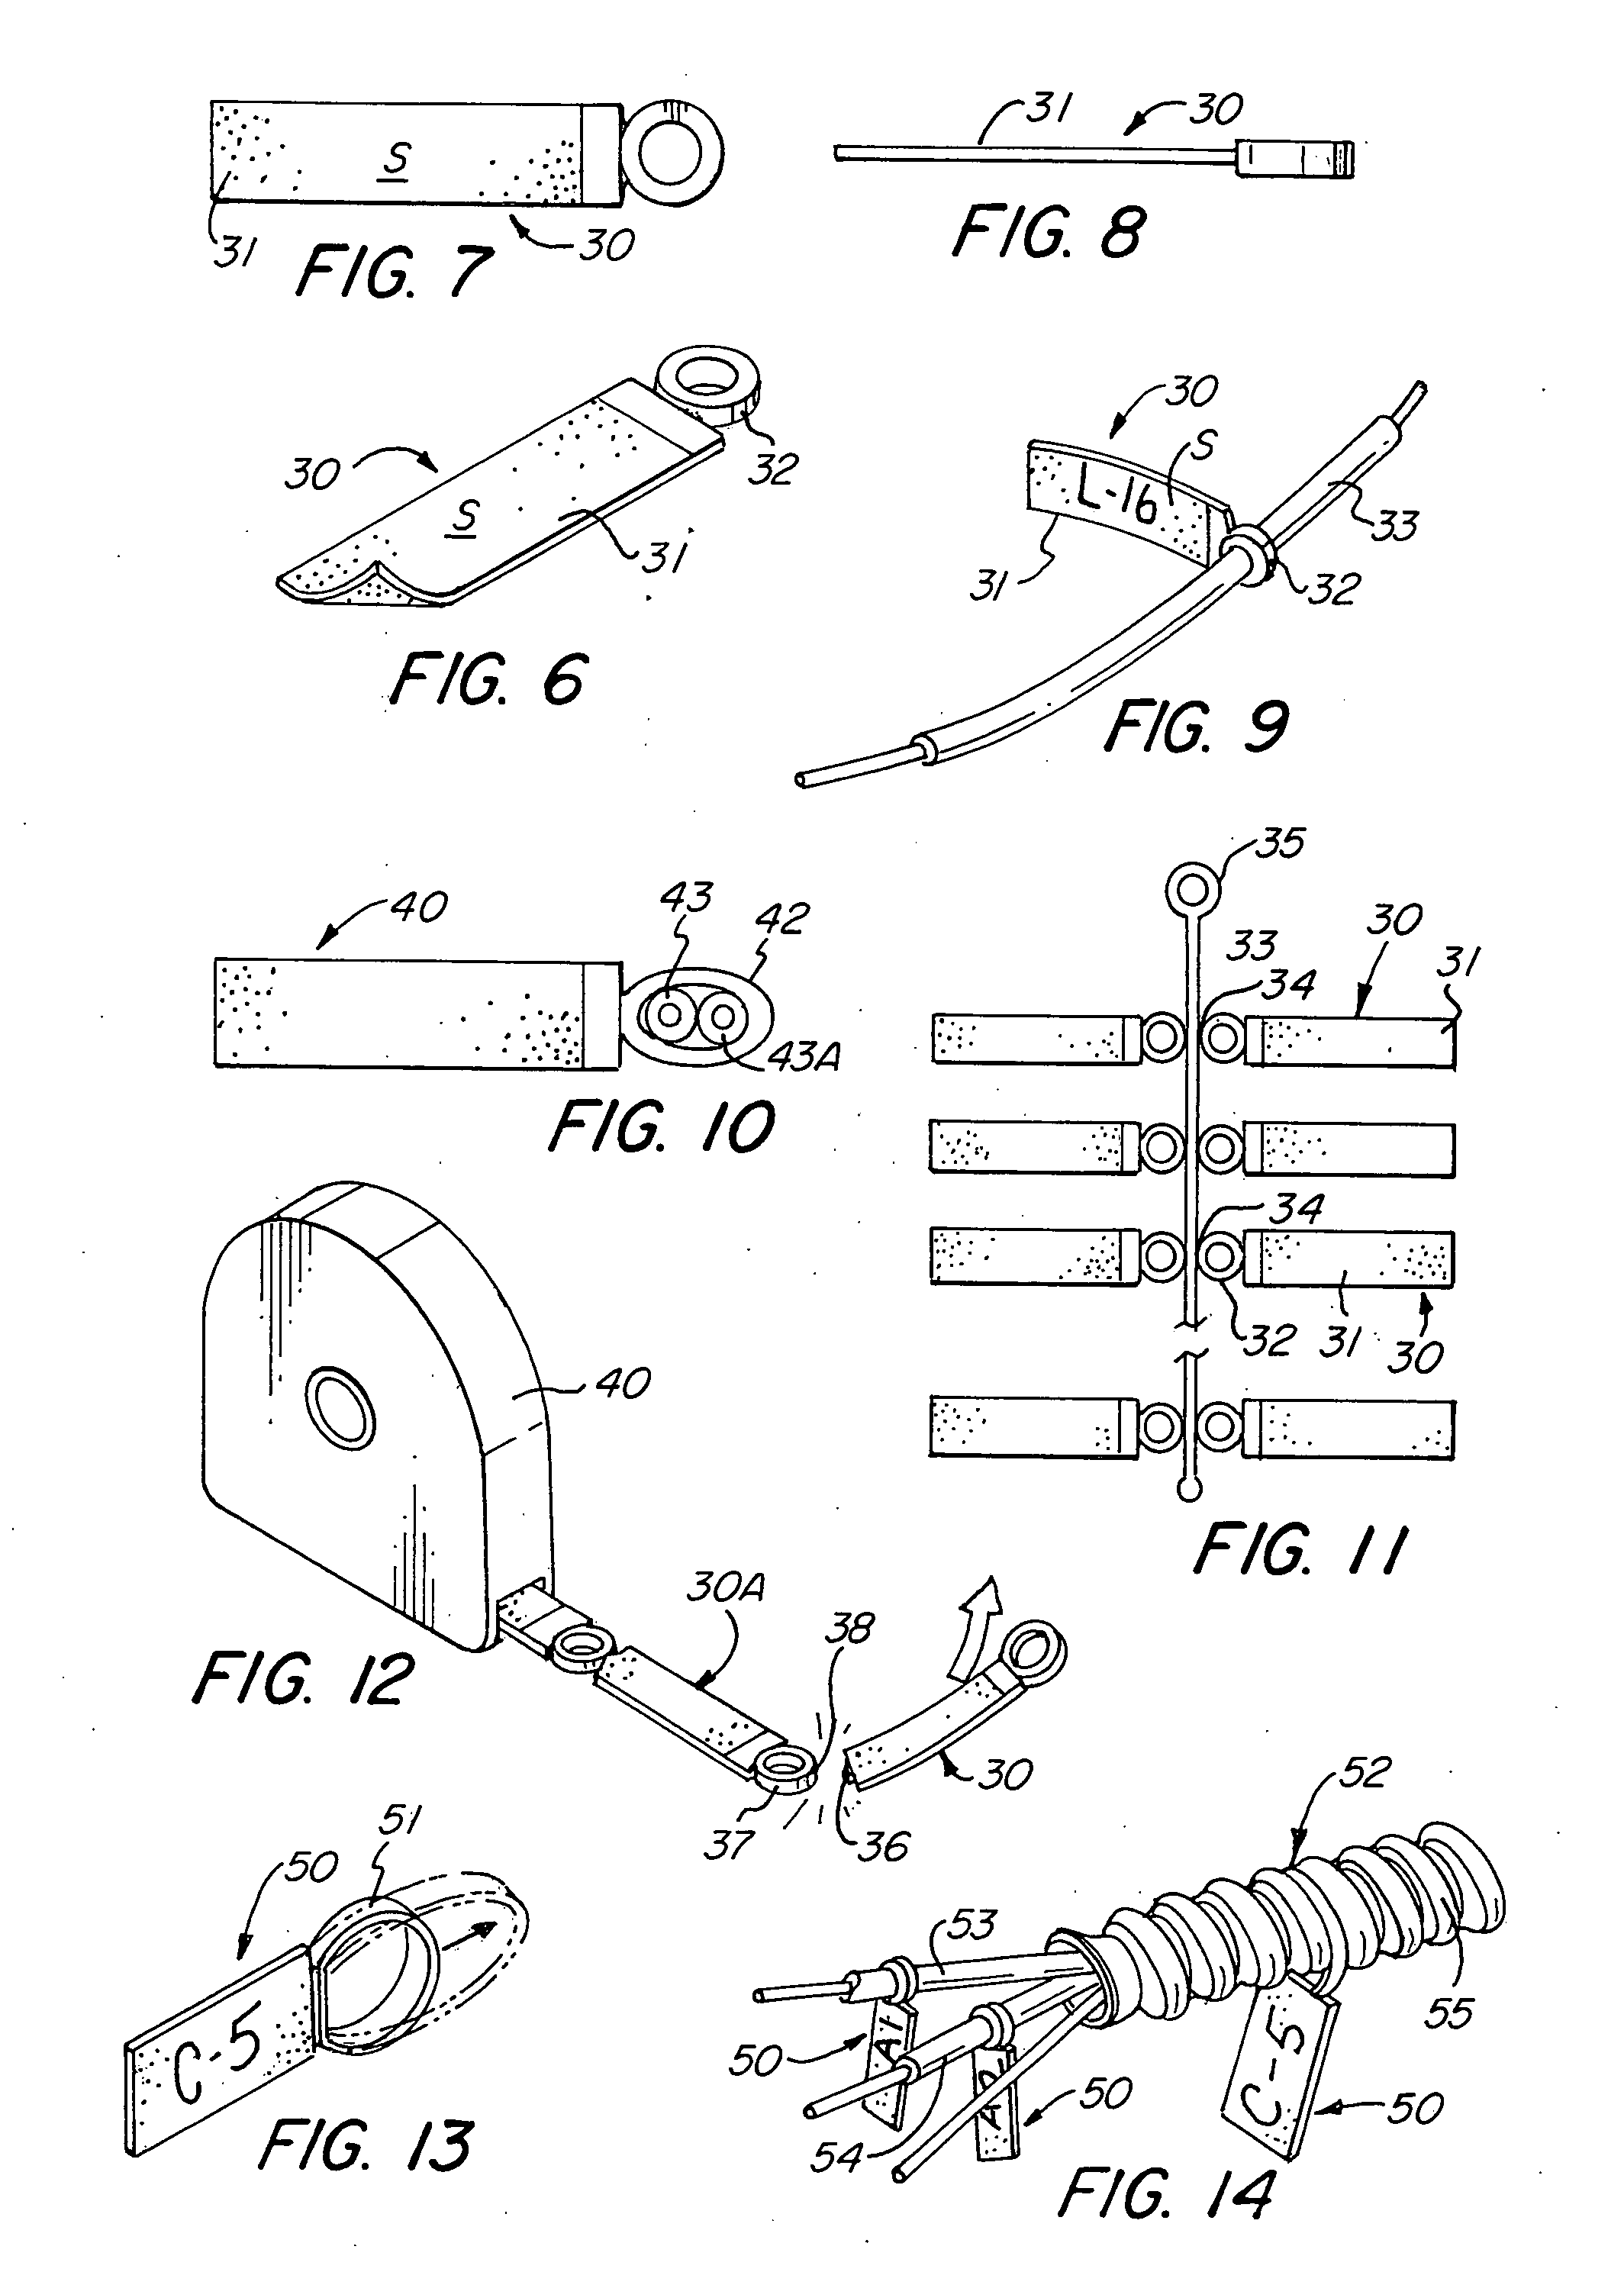 Wire/cable identification device